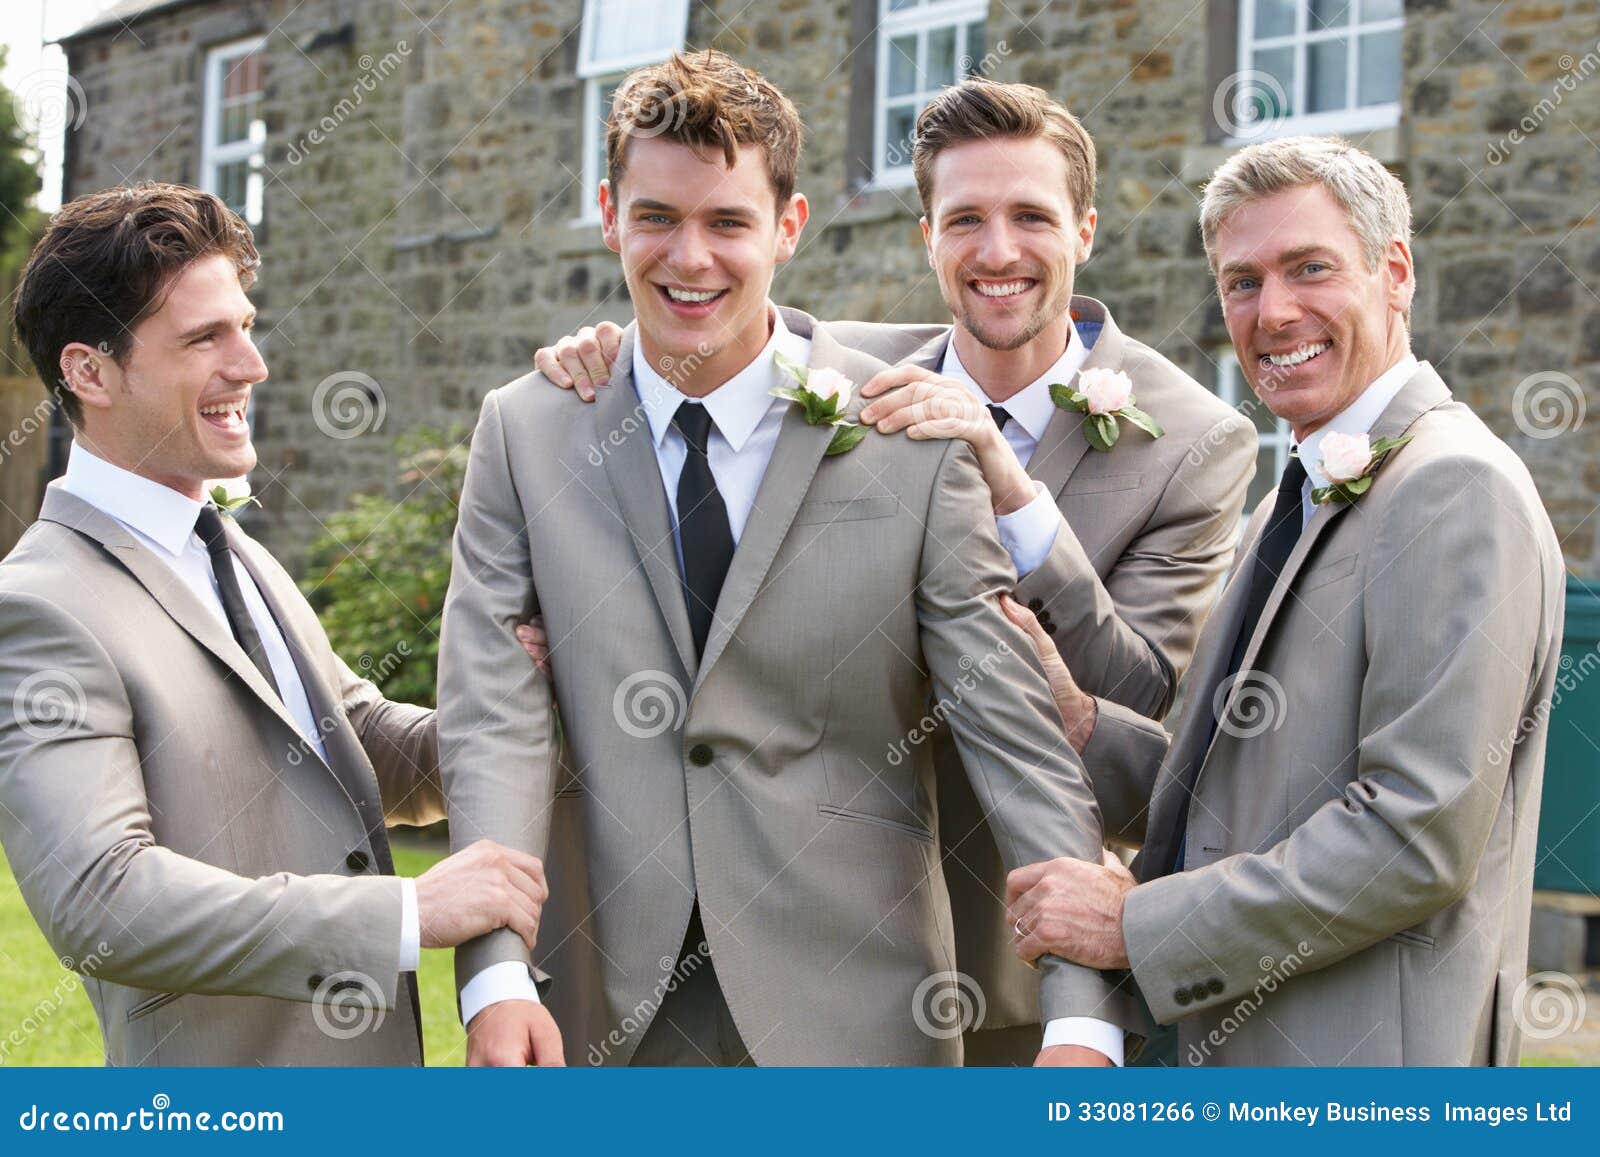 groom with best man and groomsmen at wedding